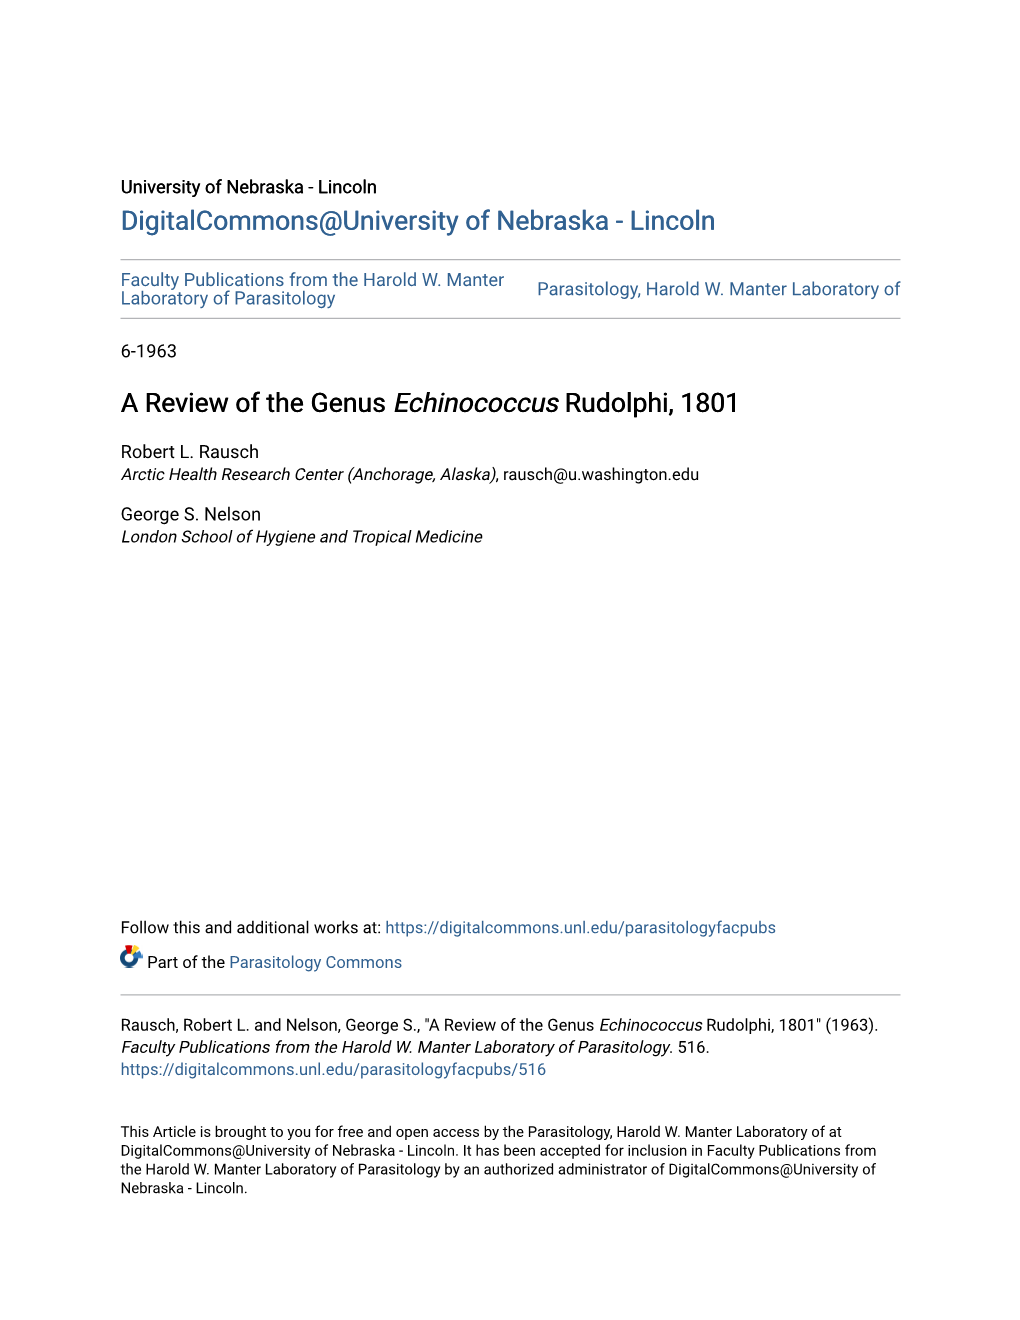 A Review of the Genus Echinococcus Rudolphi, 1801